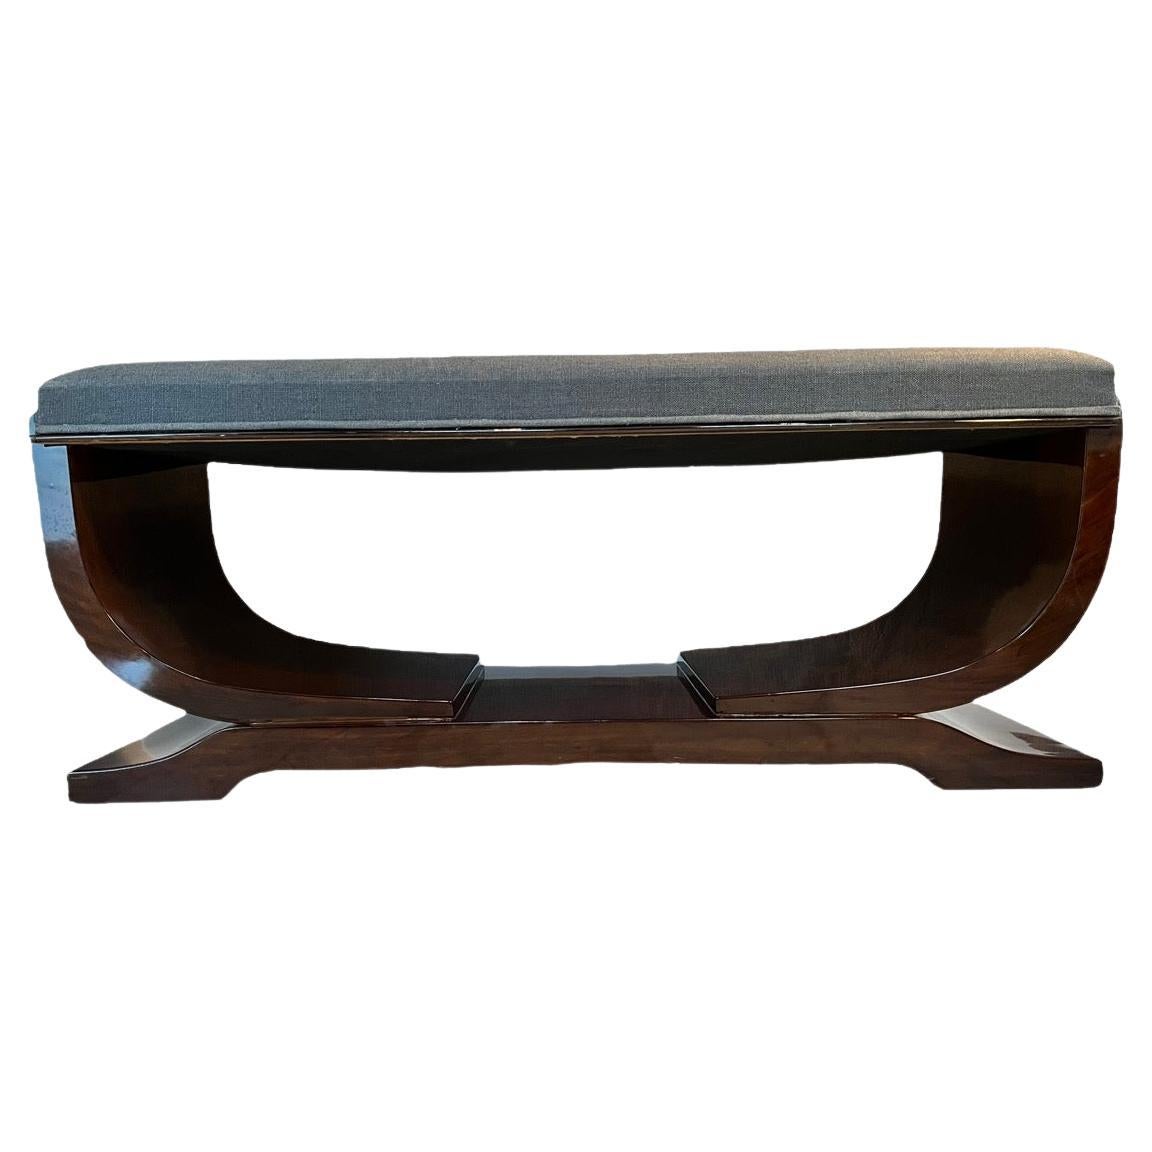 Art Deco Period '1920s' French Bench Made of Rosewood For Sale